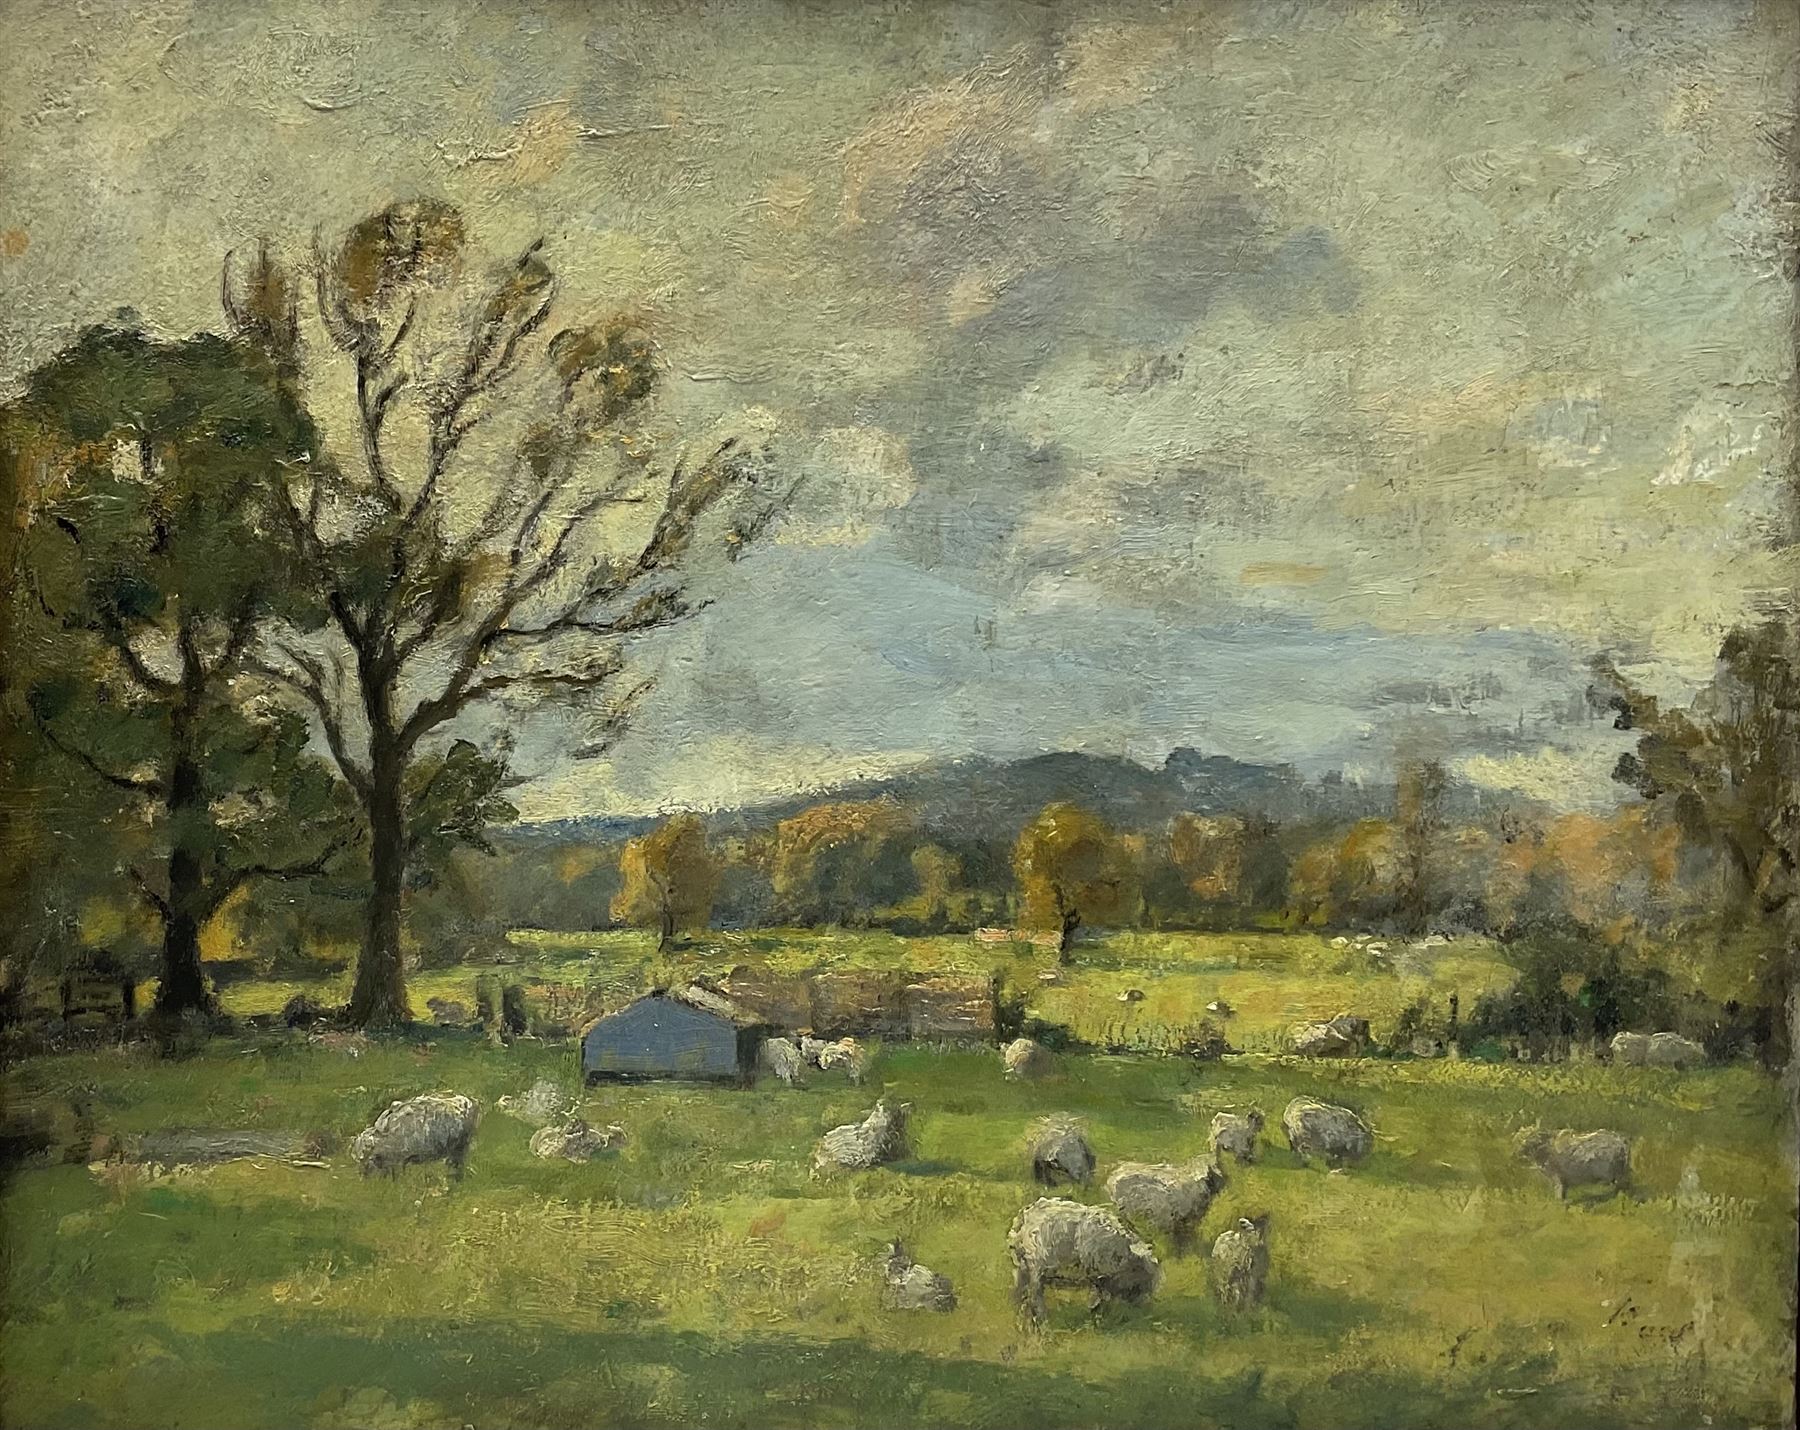 English School (Early 20th century): Sheep in Pastoral Landscape